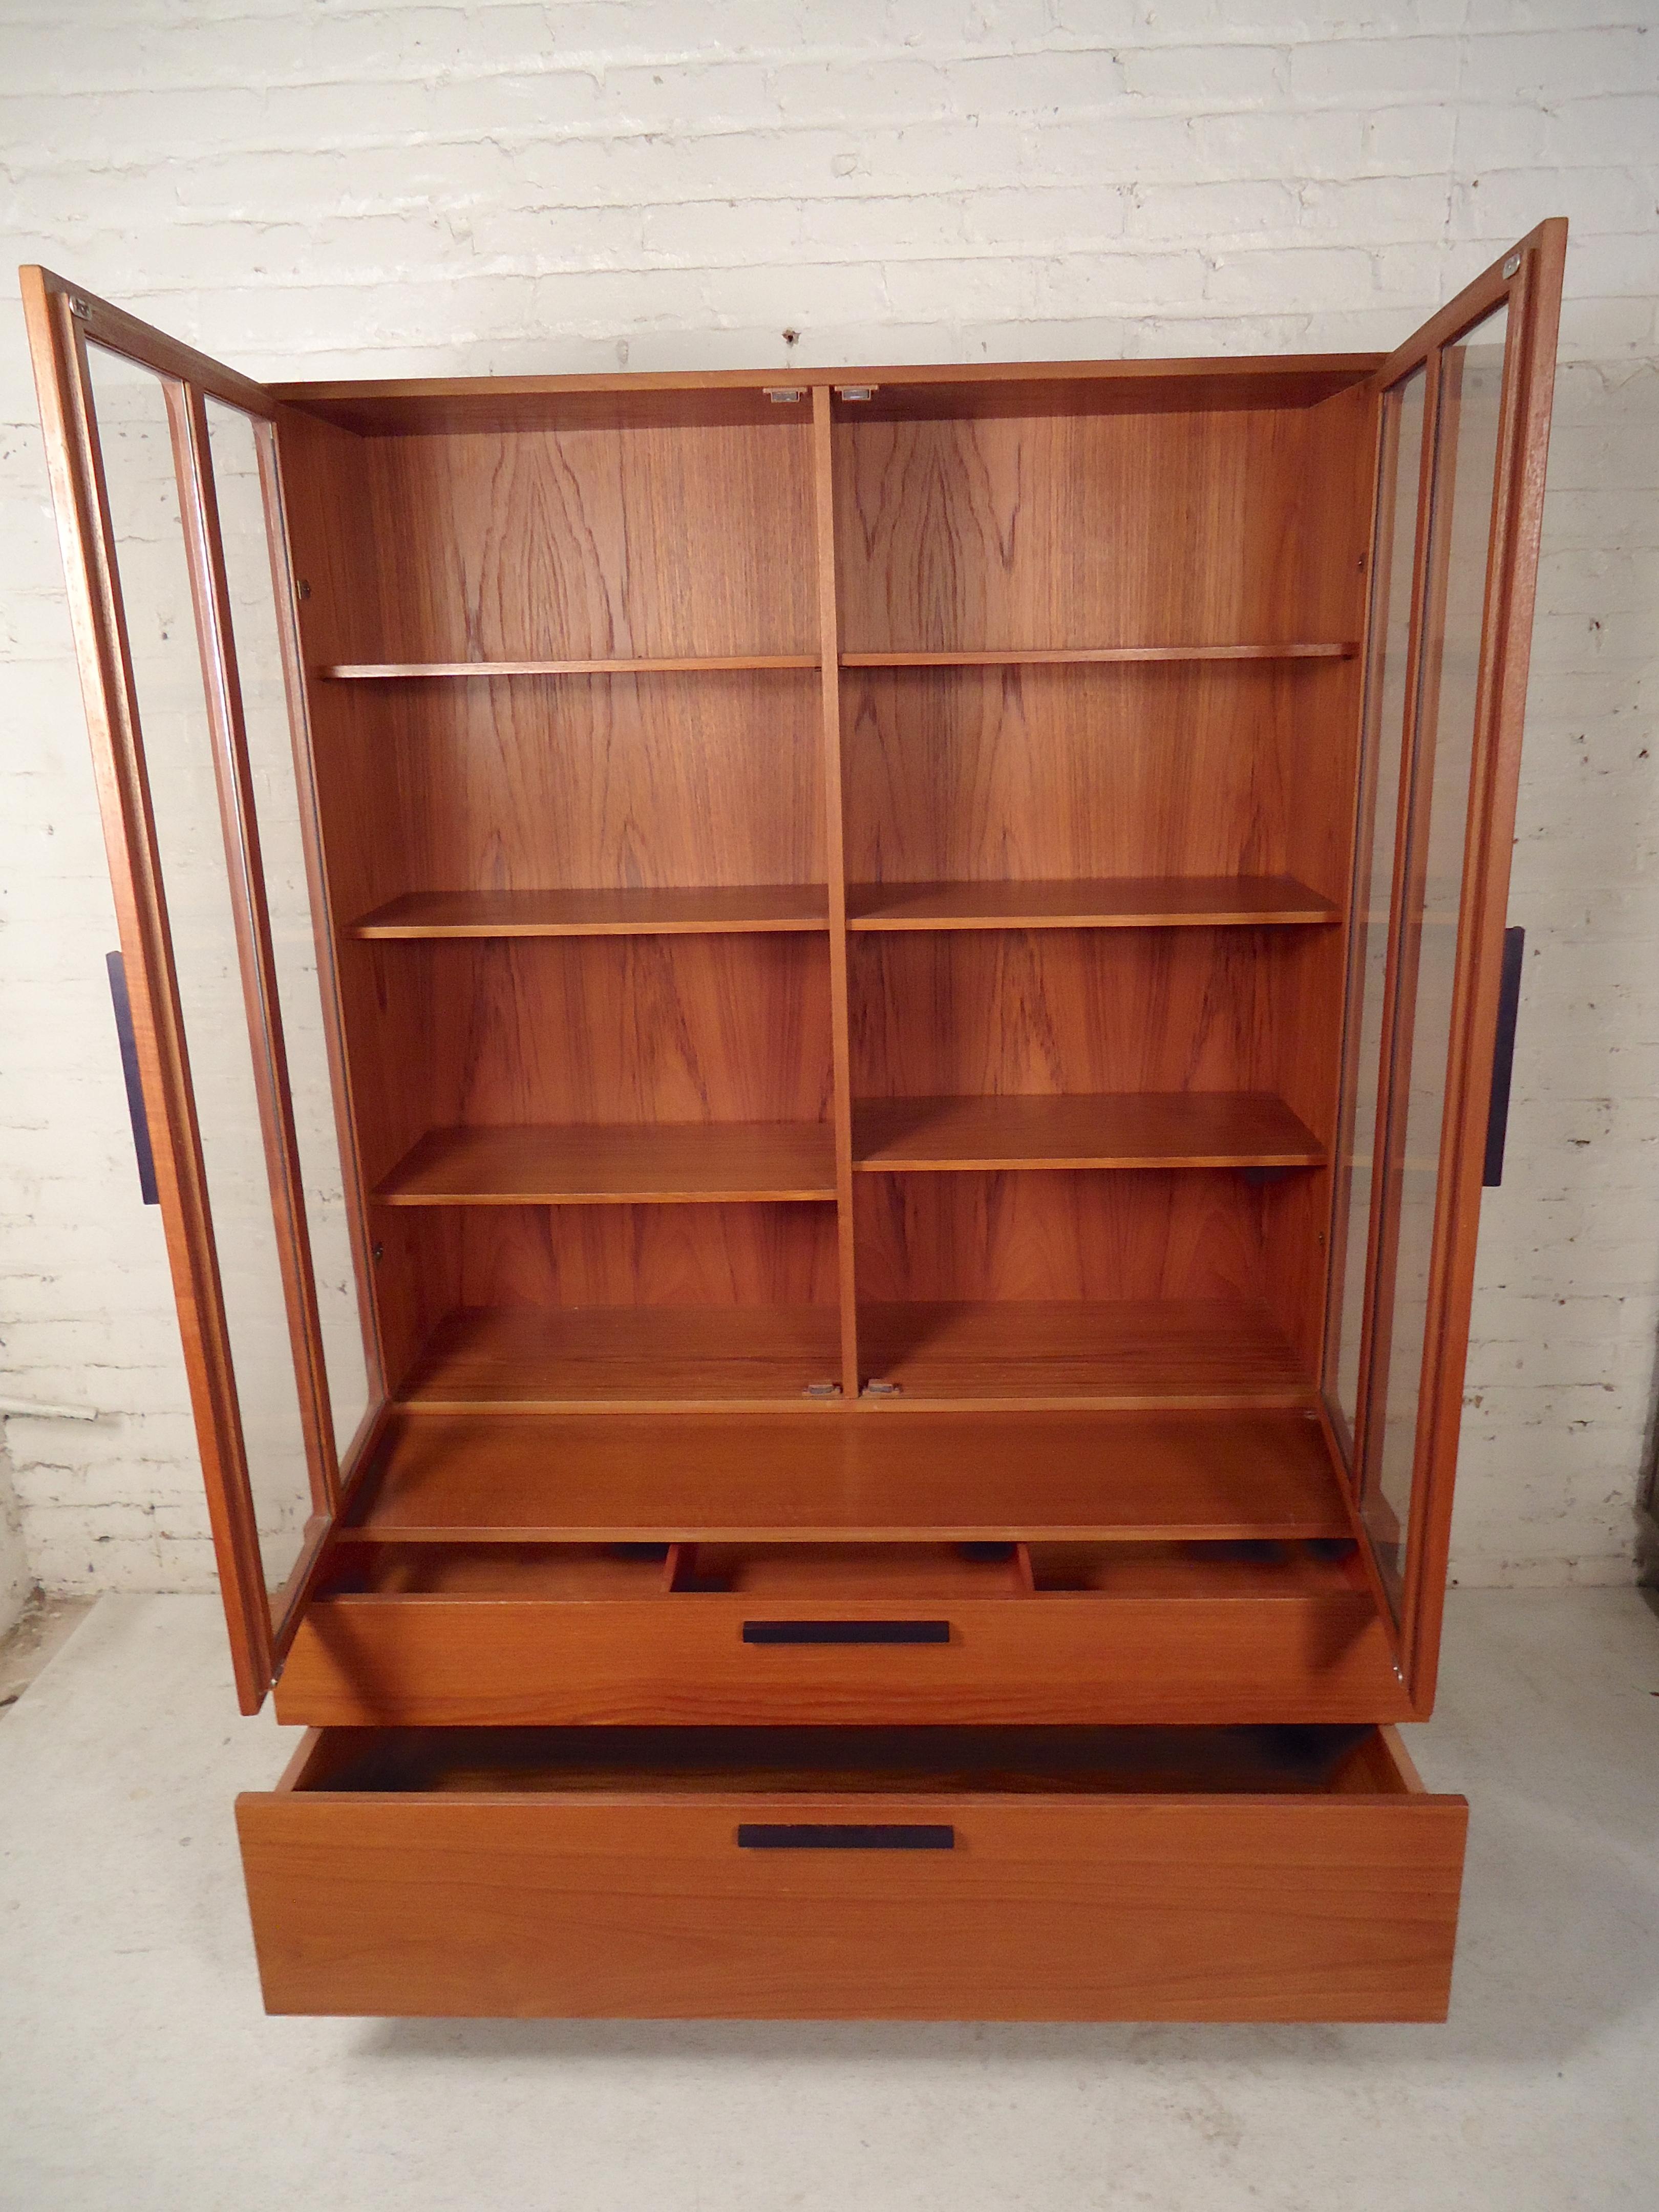 Single two-piece wall unit with bottom wide drawer storage and bookcase topper with glass doors.
Location: Brooklyn NY.
 